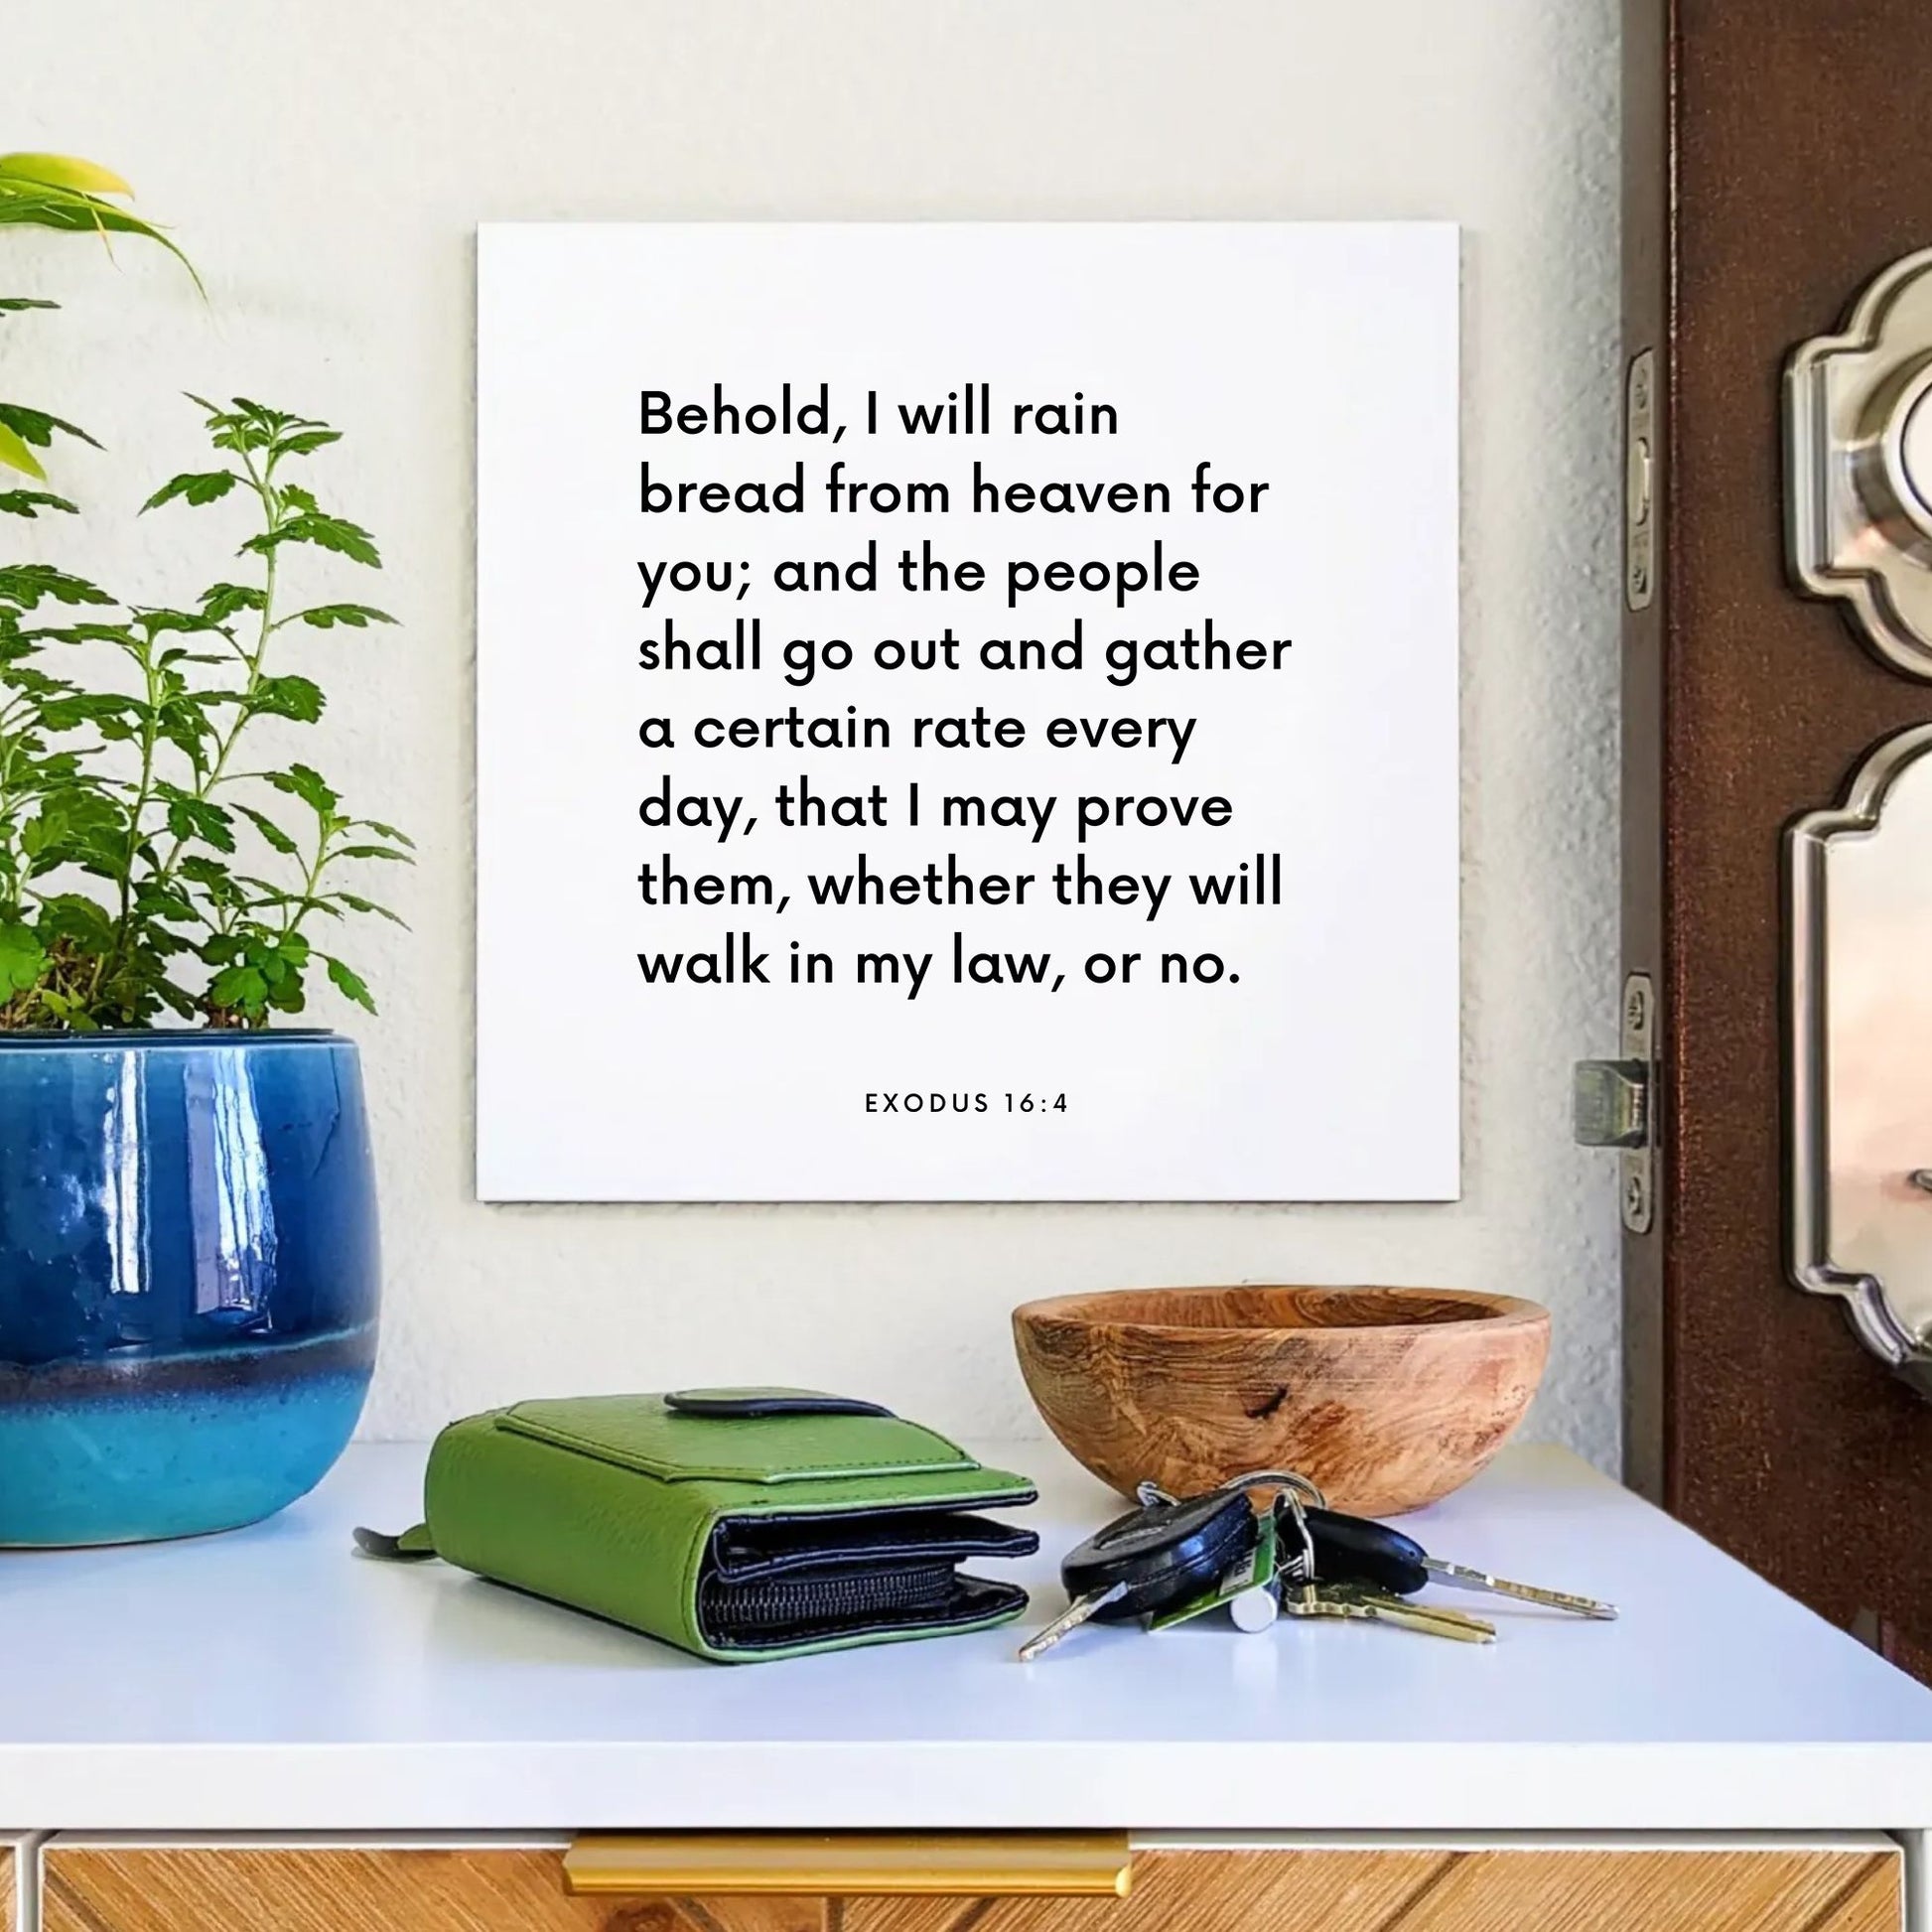 Entryway mouting of the scripture tile for Exodus 16:4 - "That I may prove them, whether they will walk in my law"